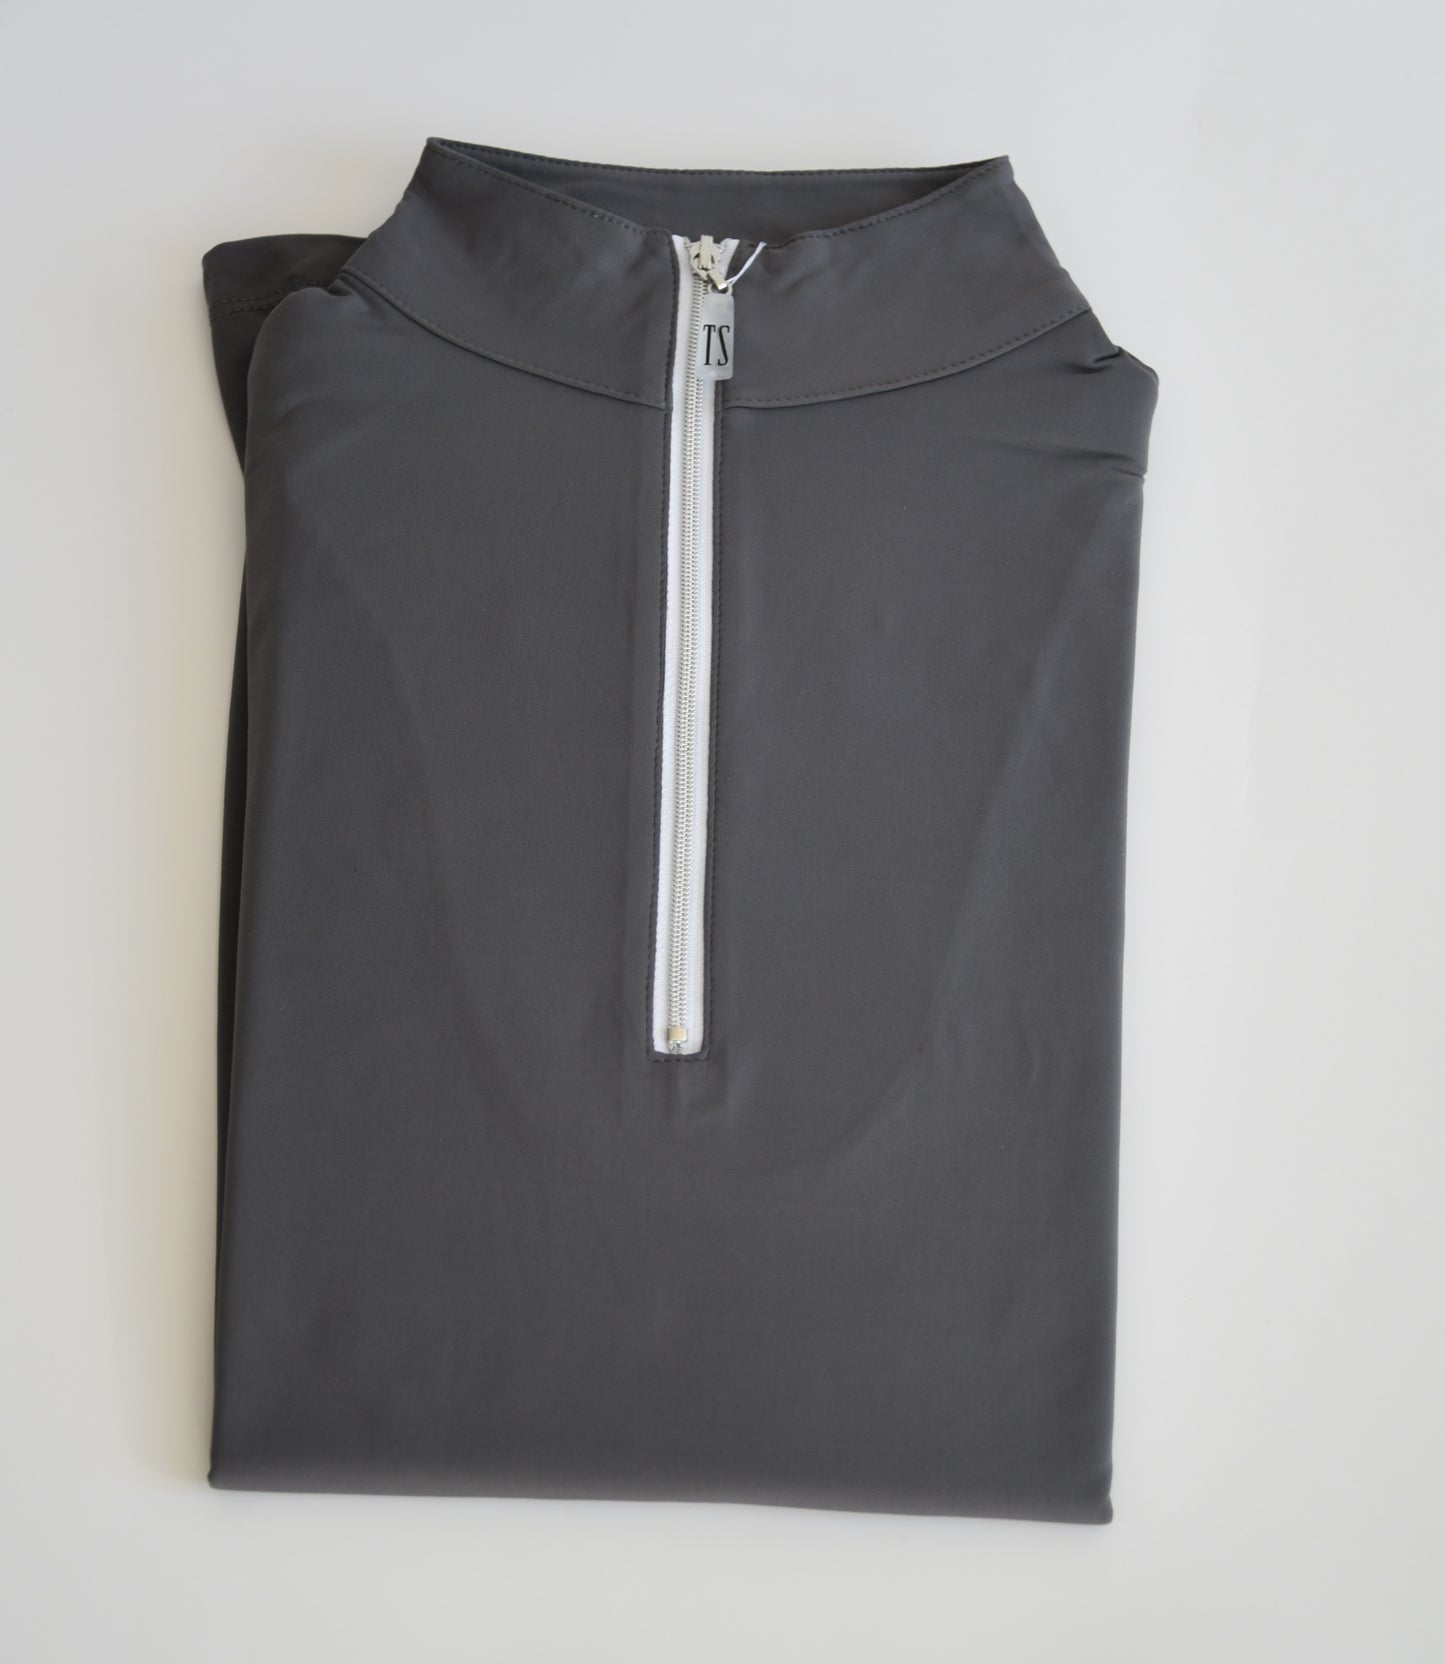 Tailored Sportsman Long Sleeve Icefil Shirt Titaium and Silver